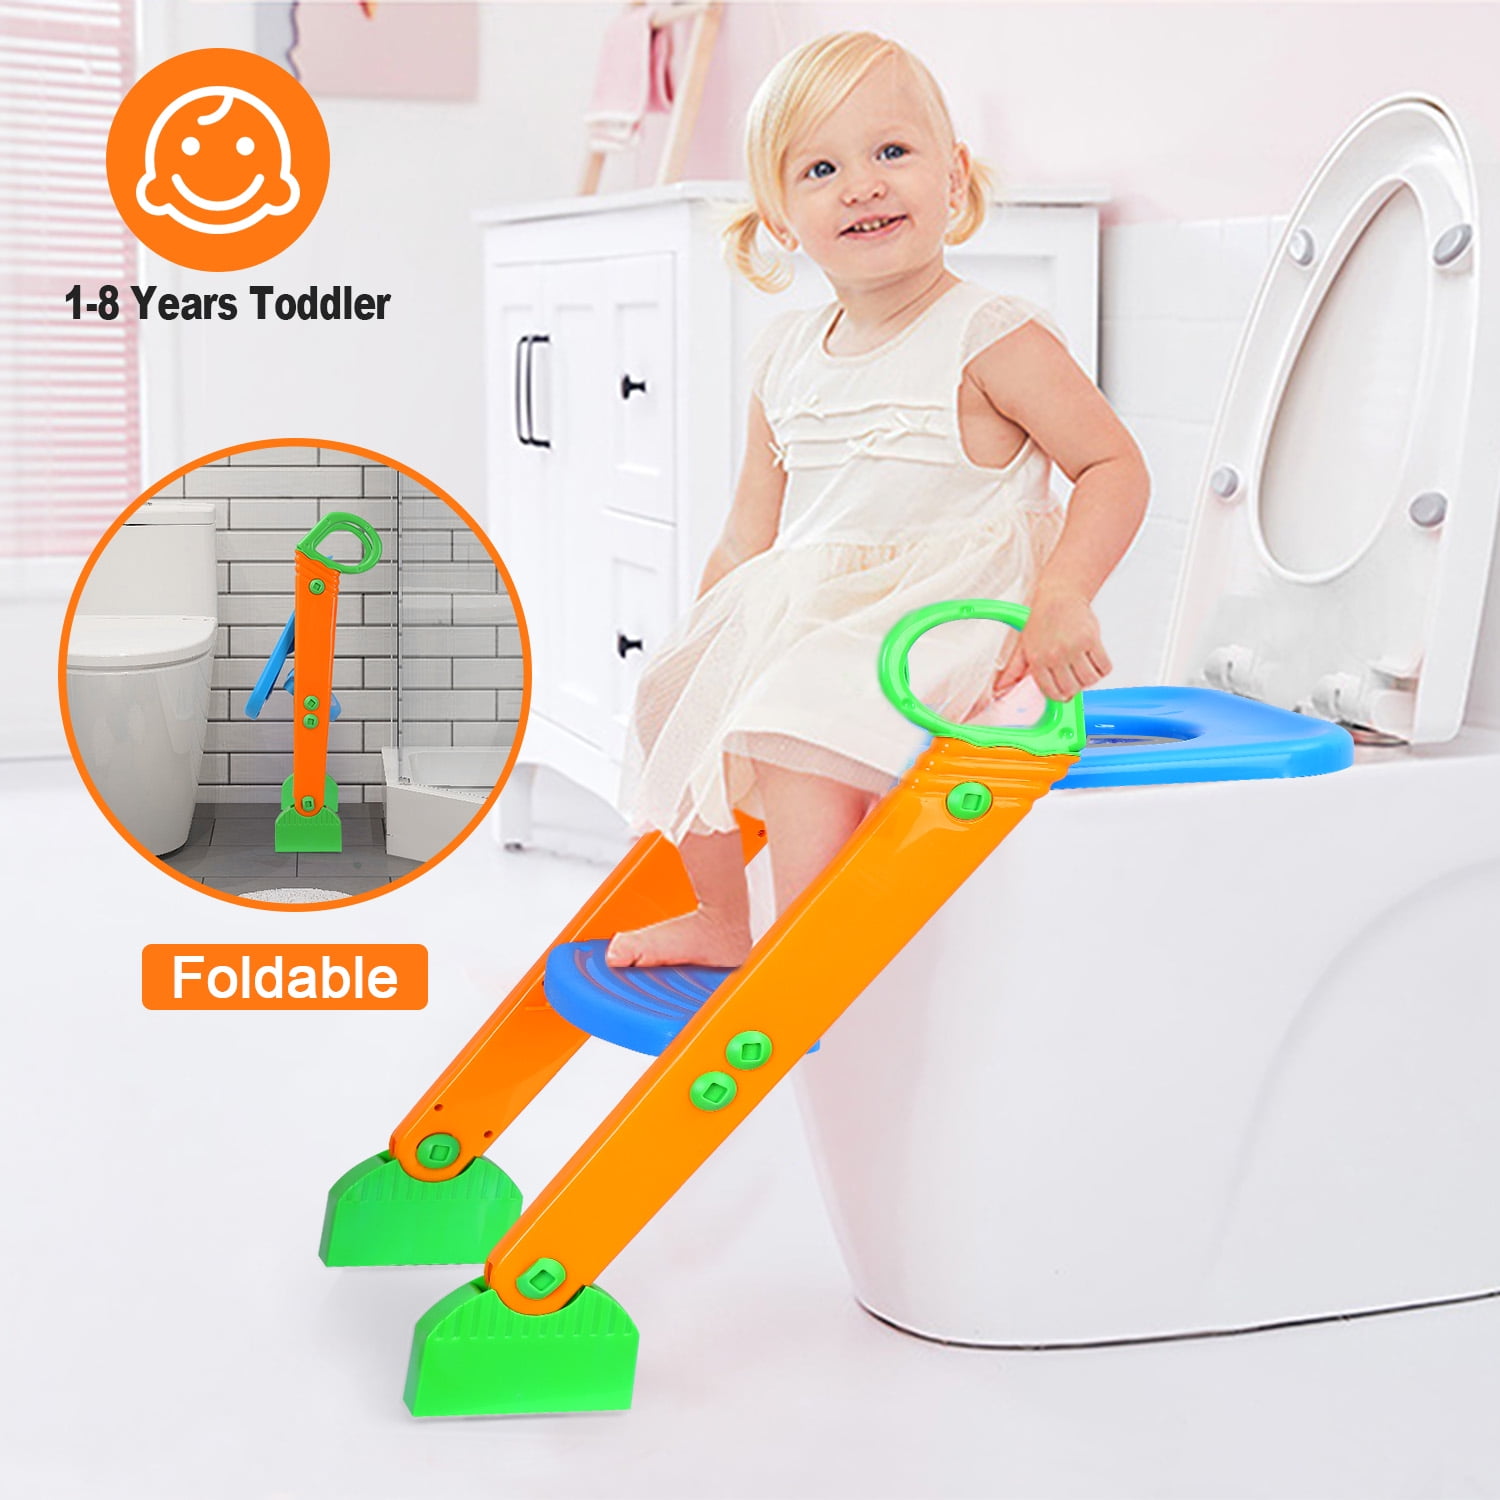 Trainer Toilet Potty Seat Chair Kids Toddler w/Ladder Step Up Training Stool NEW 